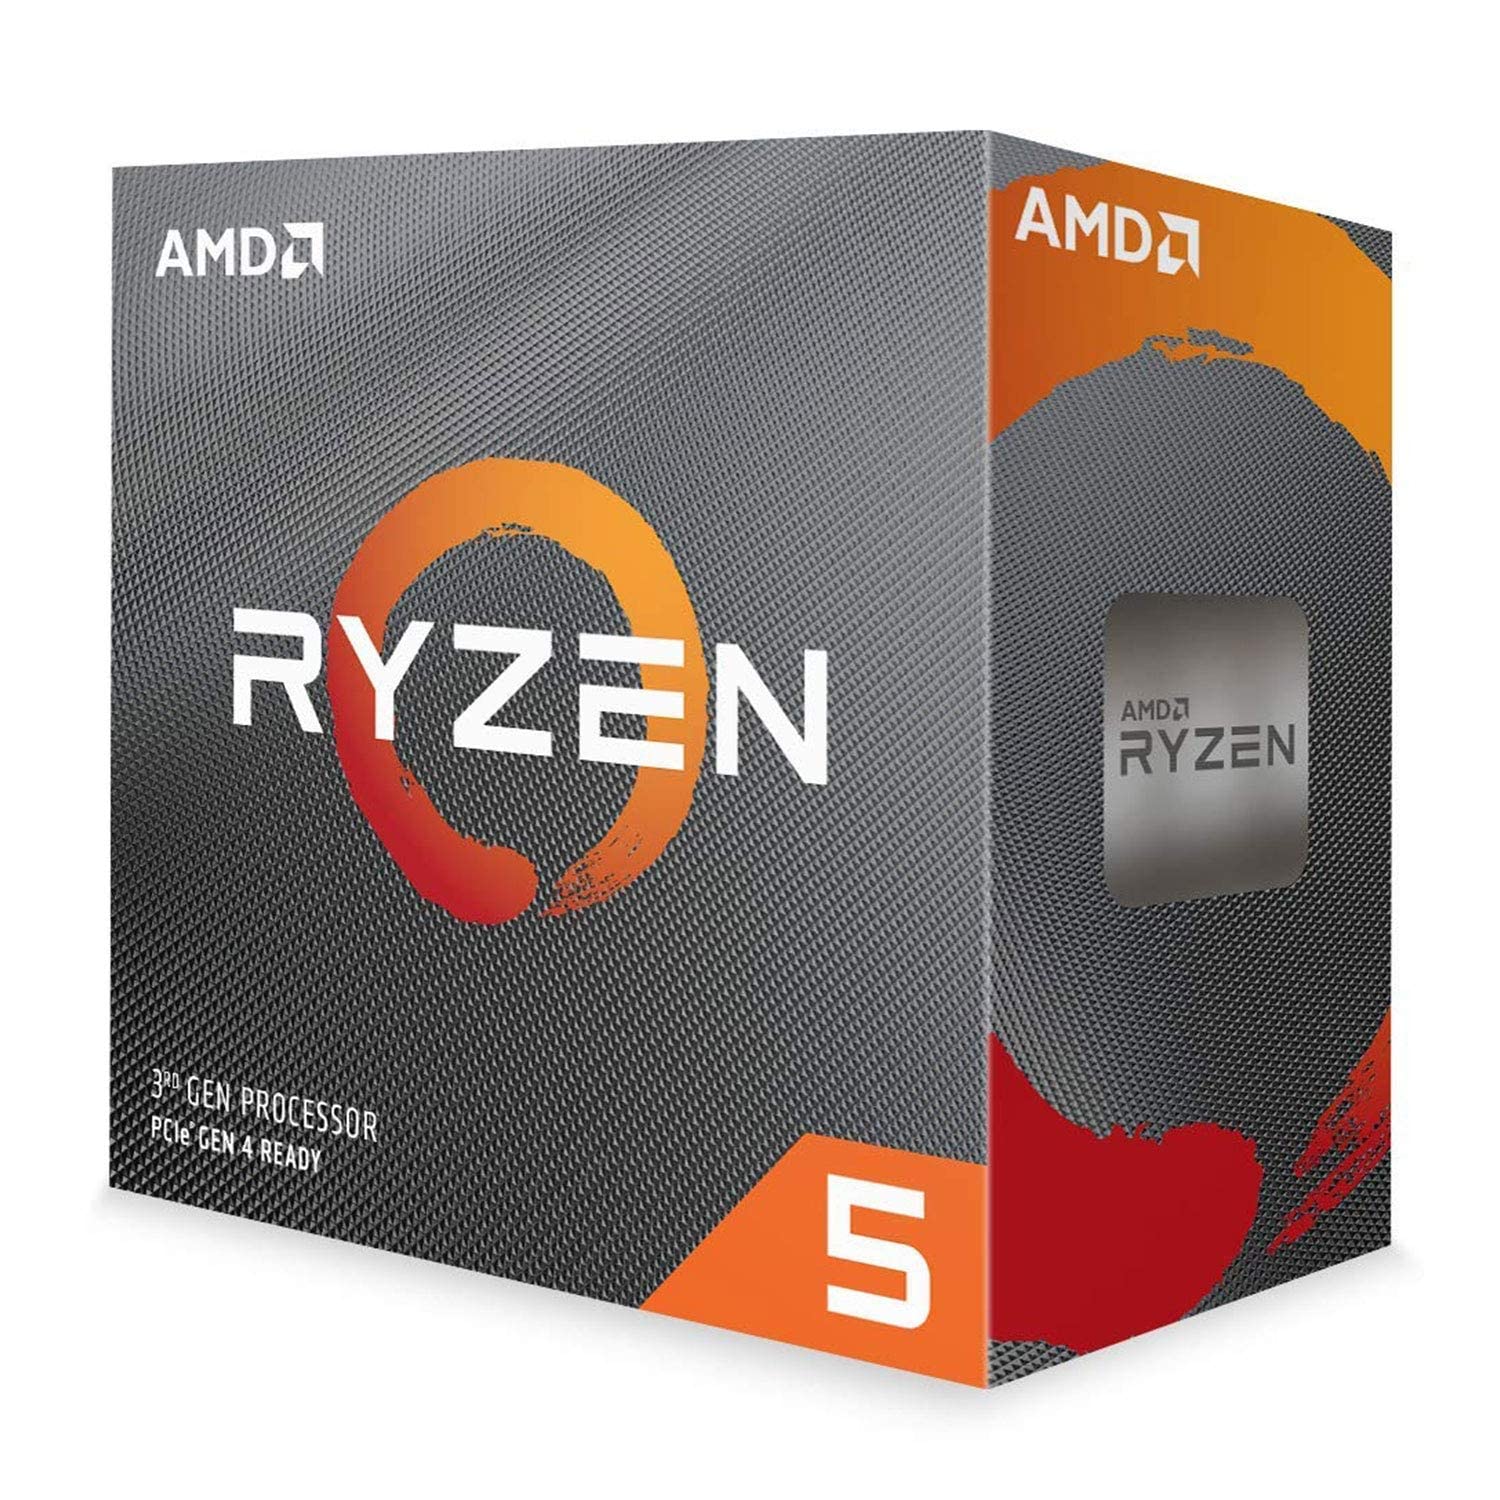 You are currently viewing Comparing AMD Ryzen 5 5600X and Ryzen 7 5700X Specs